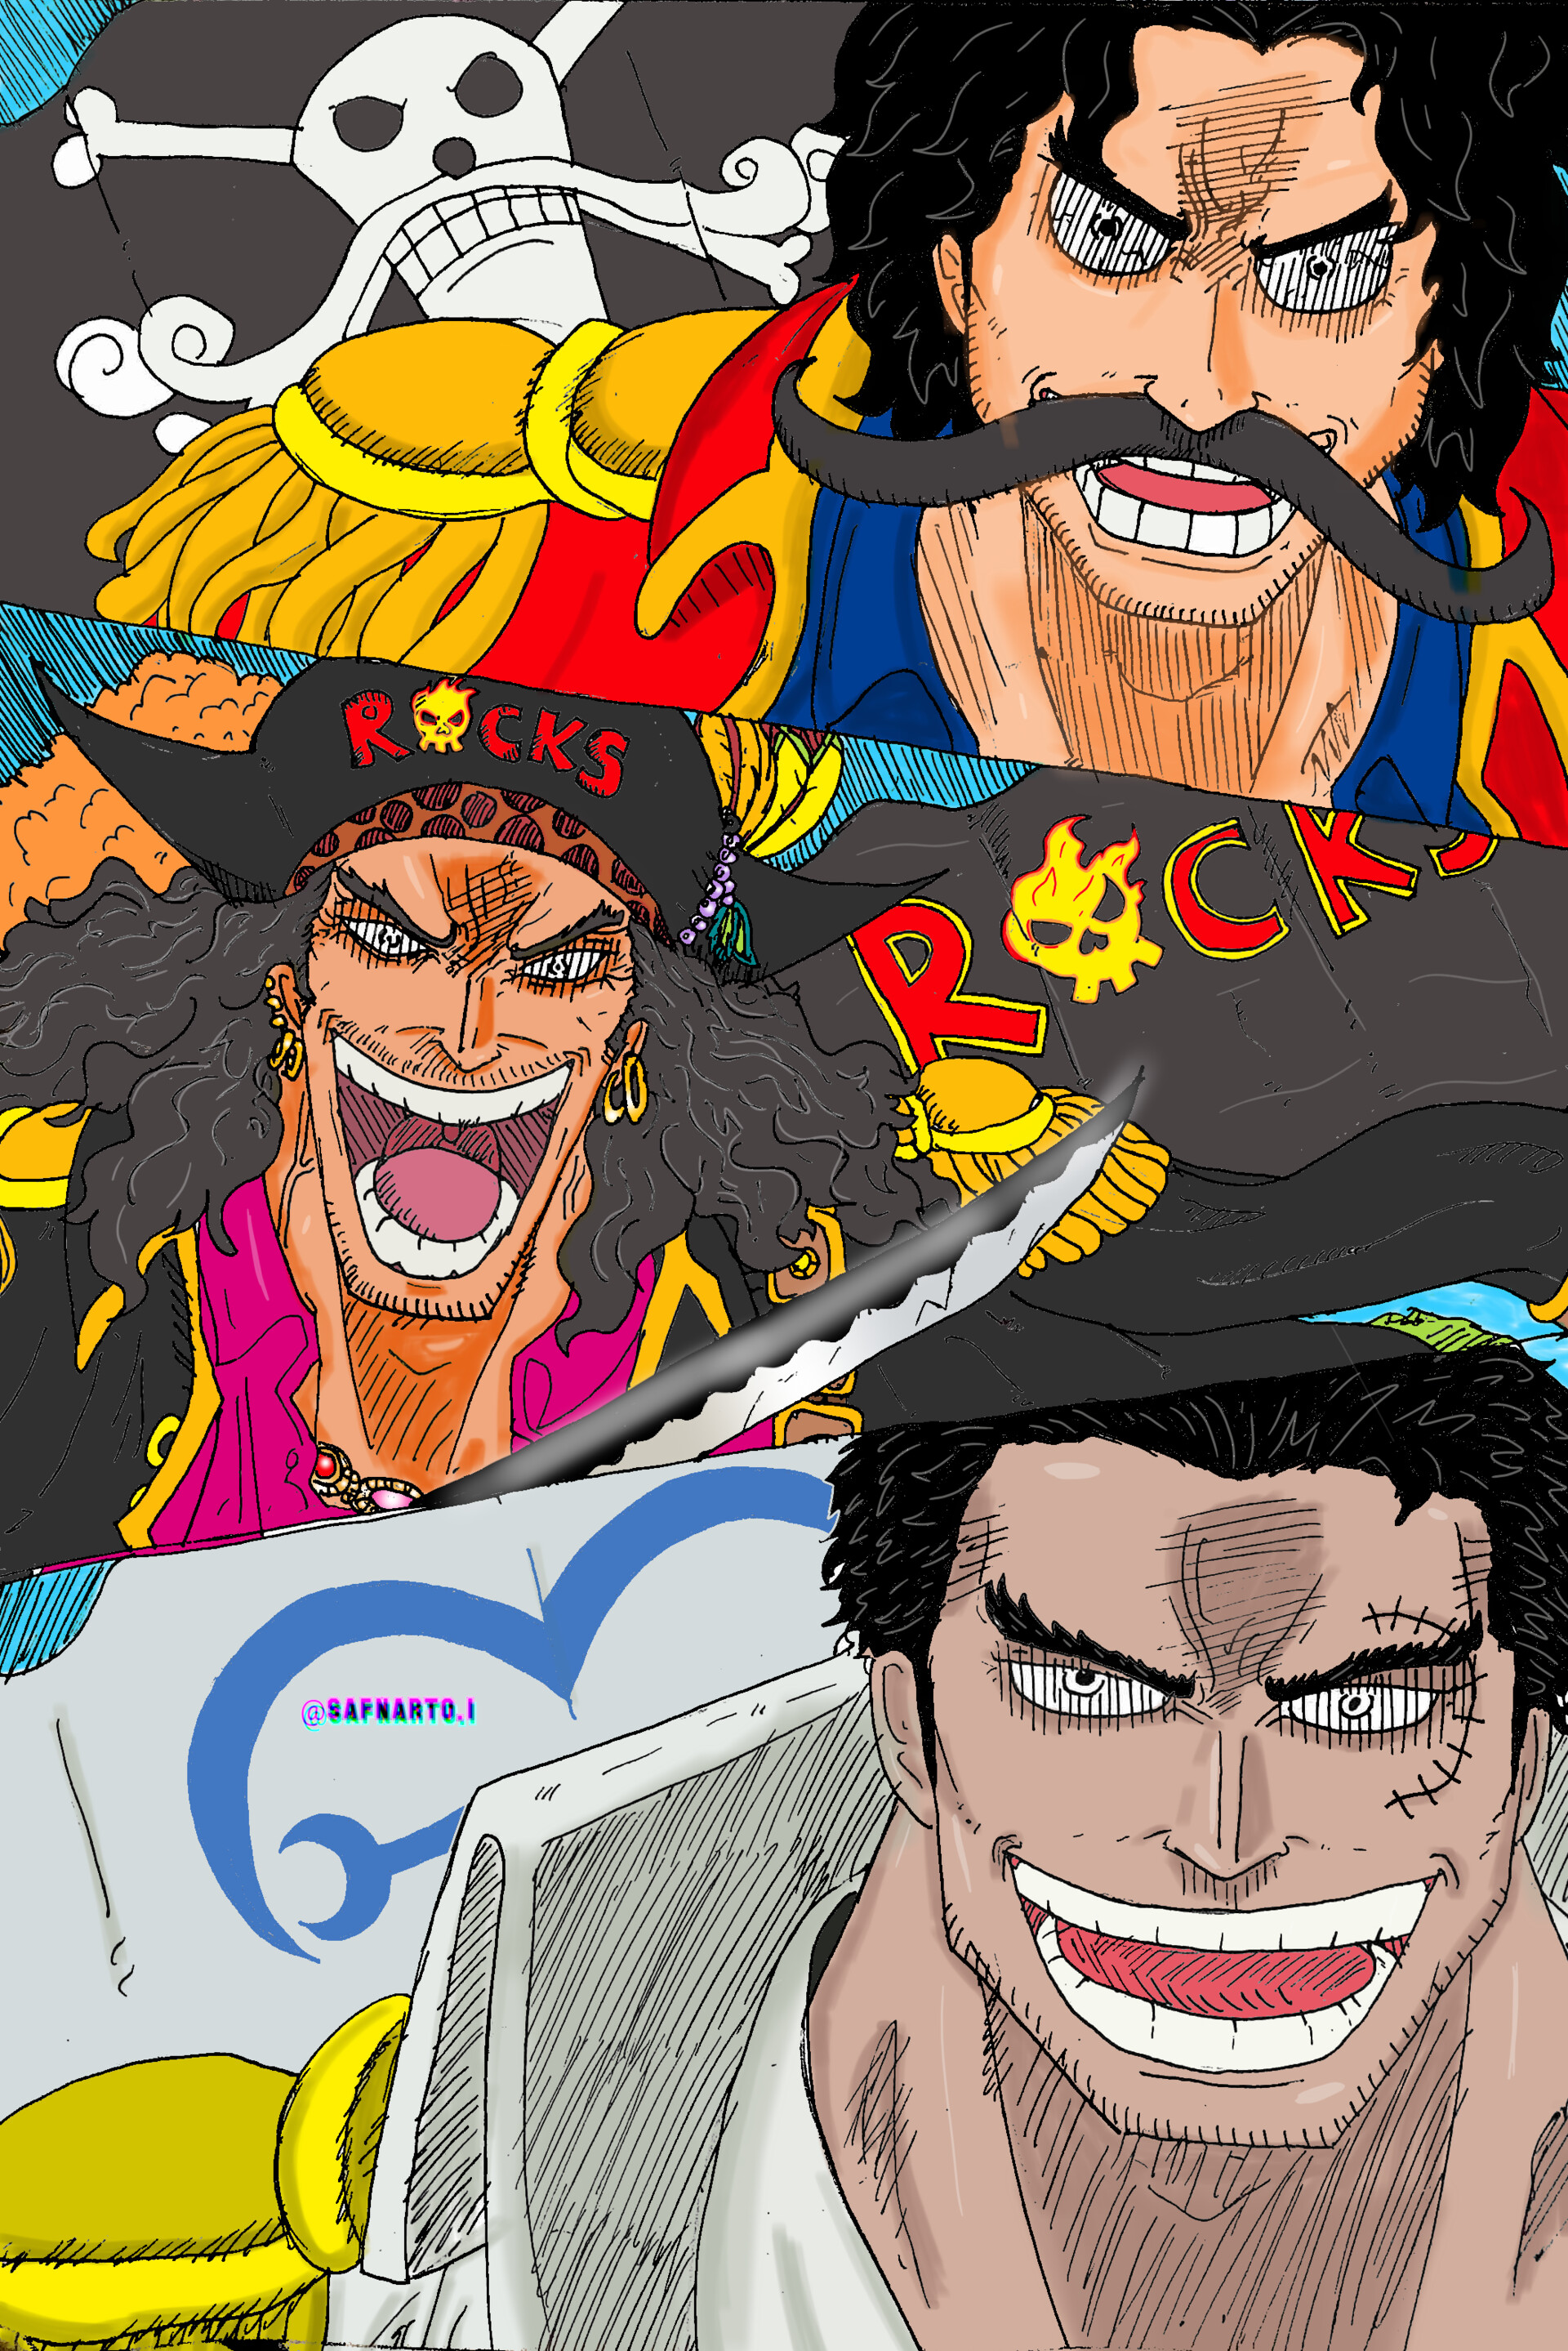 God Valley incident - One Piece by caiquenadal on DeviantArt